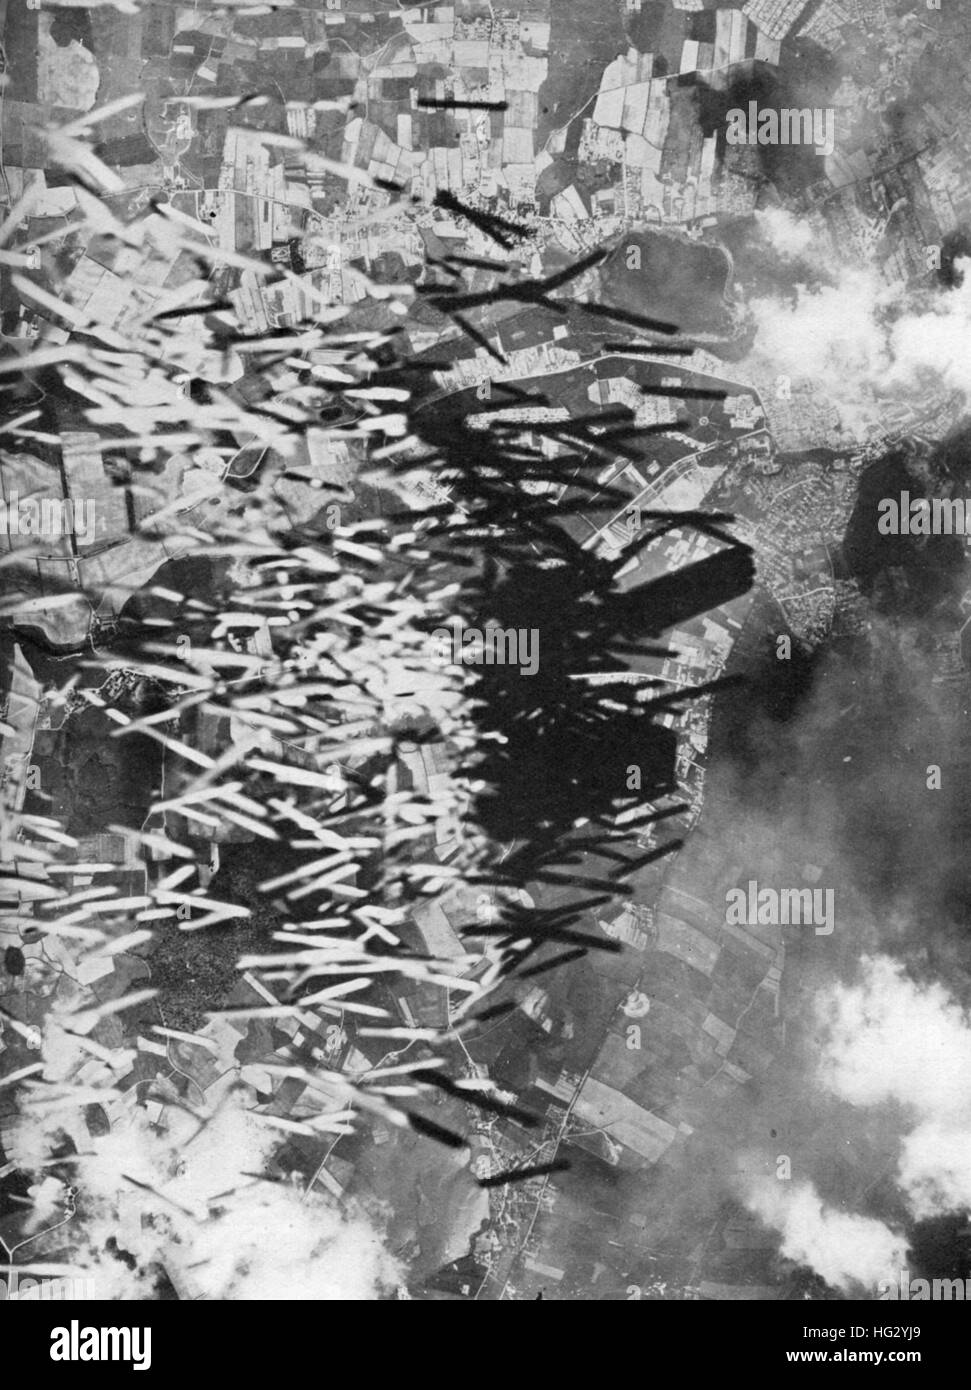 KEIL BOMBING RAID 14 MAY 1943.  USAAF B-24 bombers dropping 100lb cluster incendiaries intended to set fire to the rubble caused by earlier bombs dropped by B-17s. The primary target was the Krupp Submarine works. Stock Photo